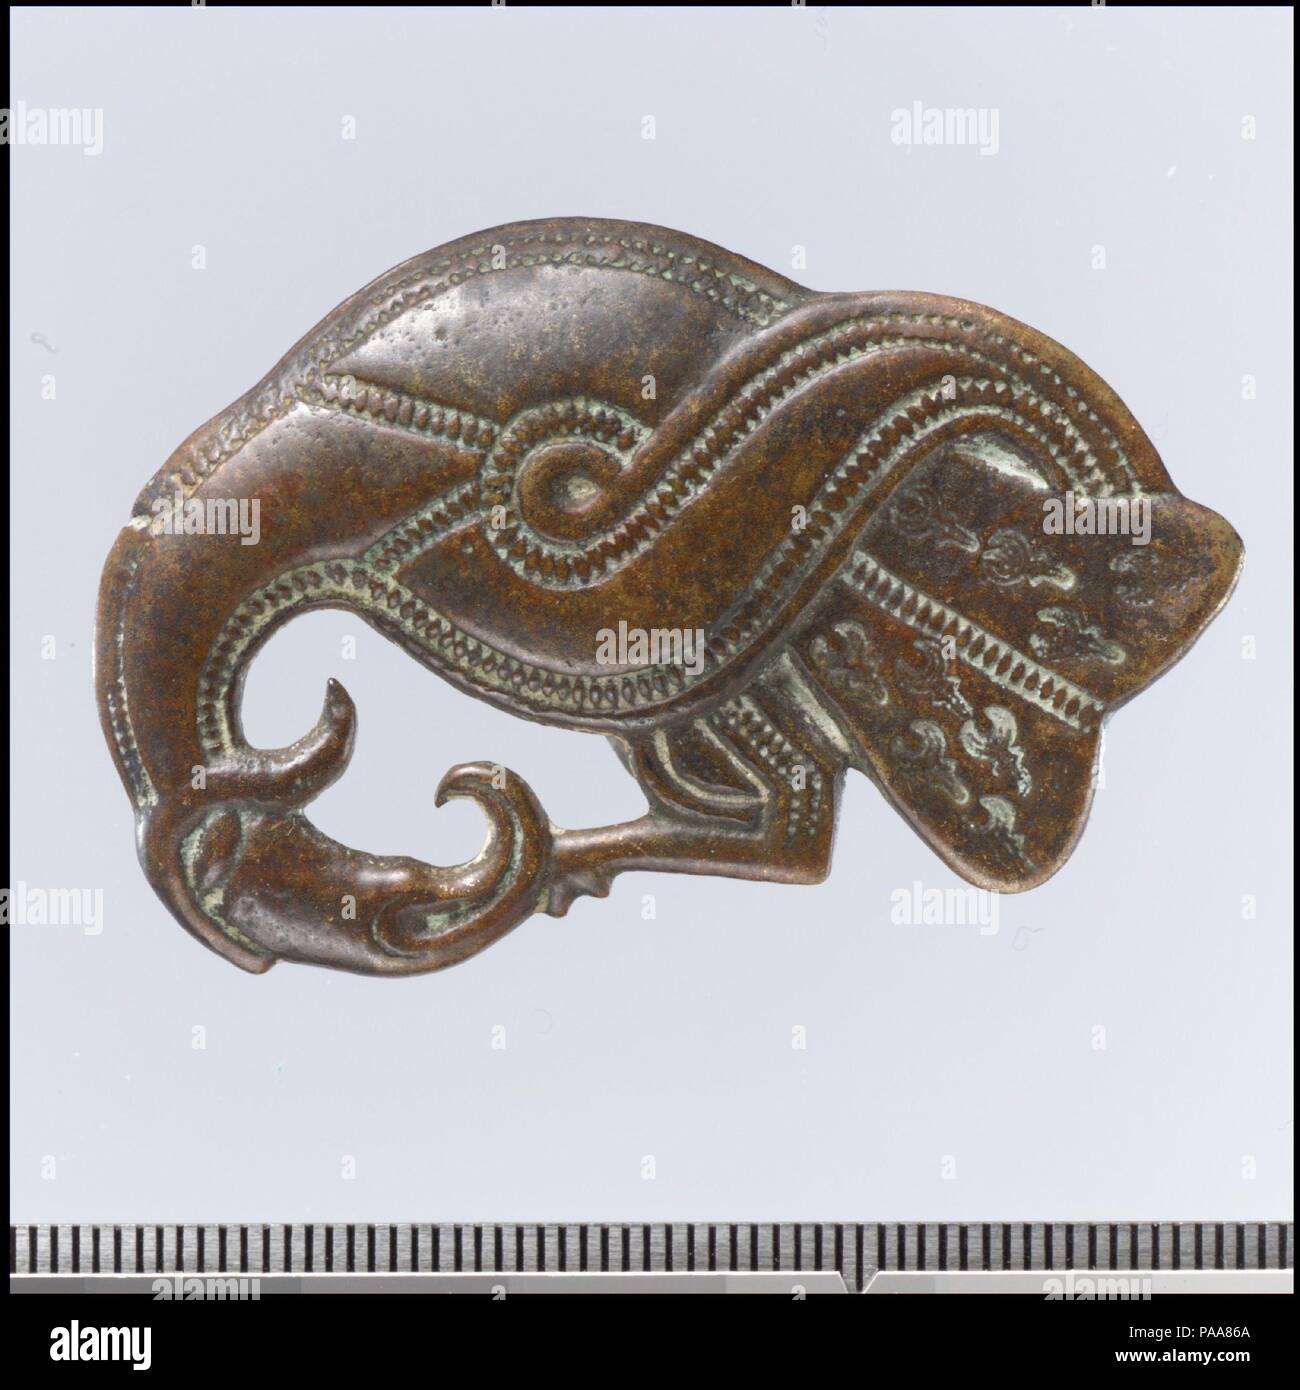 Brooch in Form of a Bird of Prey. Culture: Vendel. Dimensions: Overall: 2 1/8 x 1 1/4 x 3/8 in. (5.4 x 3.2 x 1 cm). Date: late 500s.  The head and right leg of this elegant bird brooch are in left profile, while its rounded body and flaring tail are presented frontally. The extended right wing curves behind the tail. The edges of the neck, wings, and tail, and the upper part of the leg are outlined with pseudobeading. Nine stamped (punched?) crayfish decorate the tail. The position of the head, supported by the raised leg, indicates that the bird is sleeping. Museum: Metropolitan Museum of Art Stock Photo